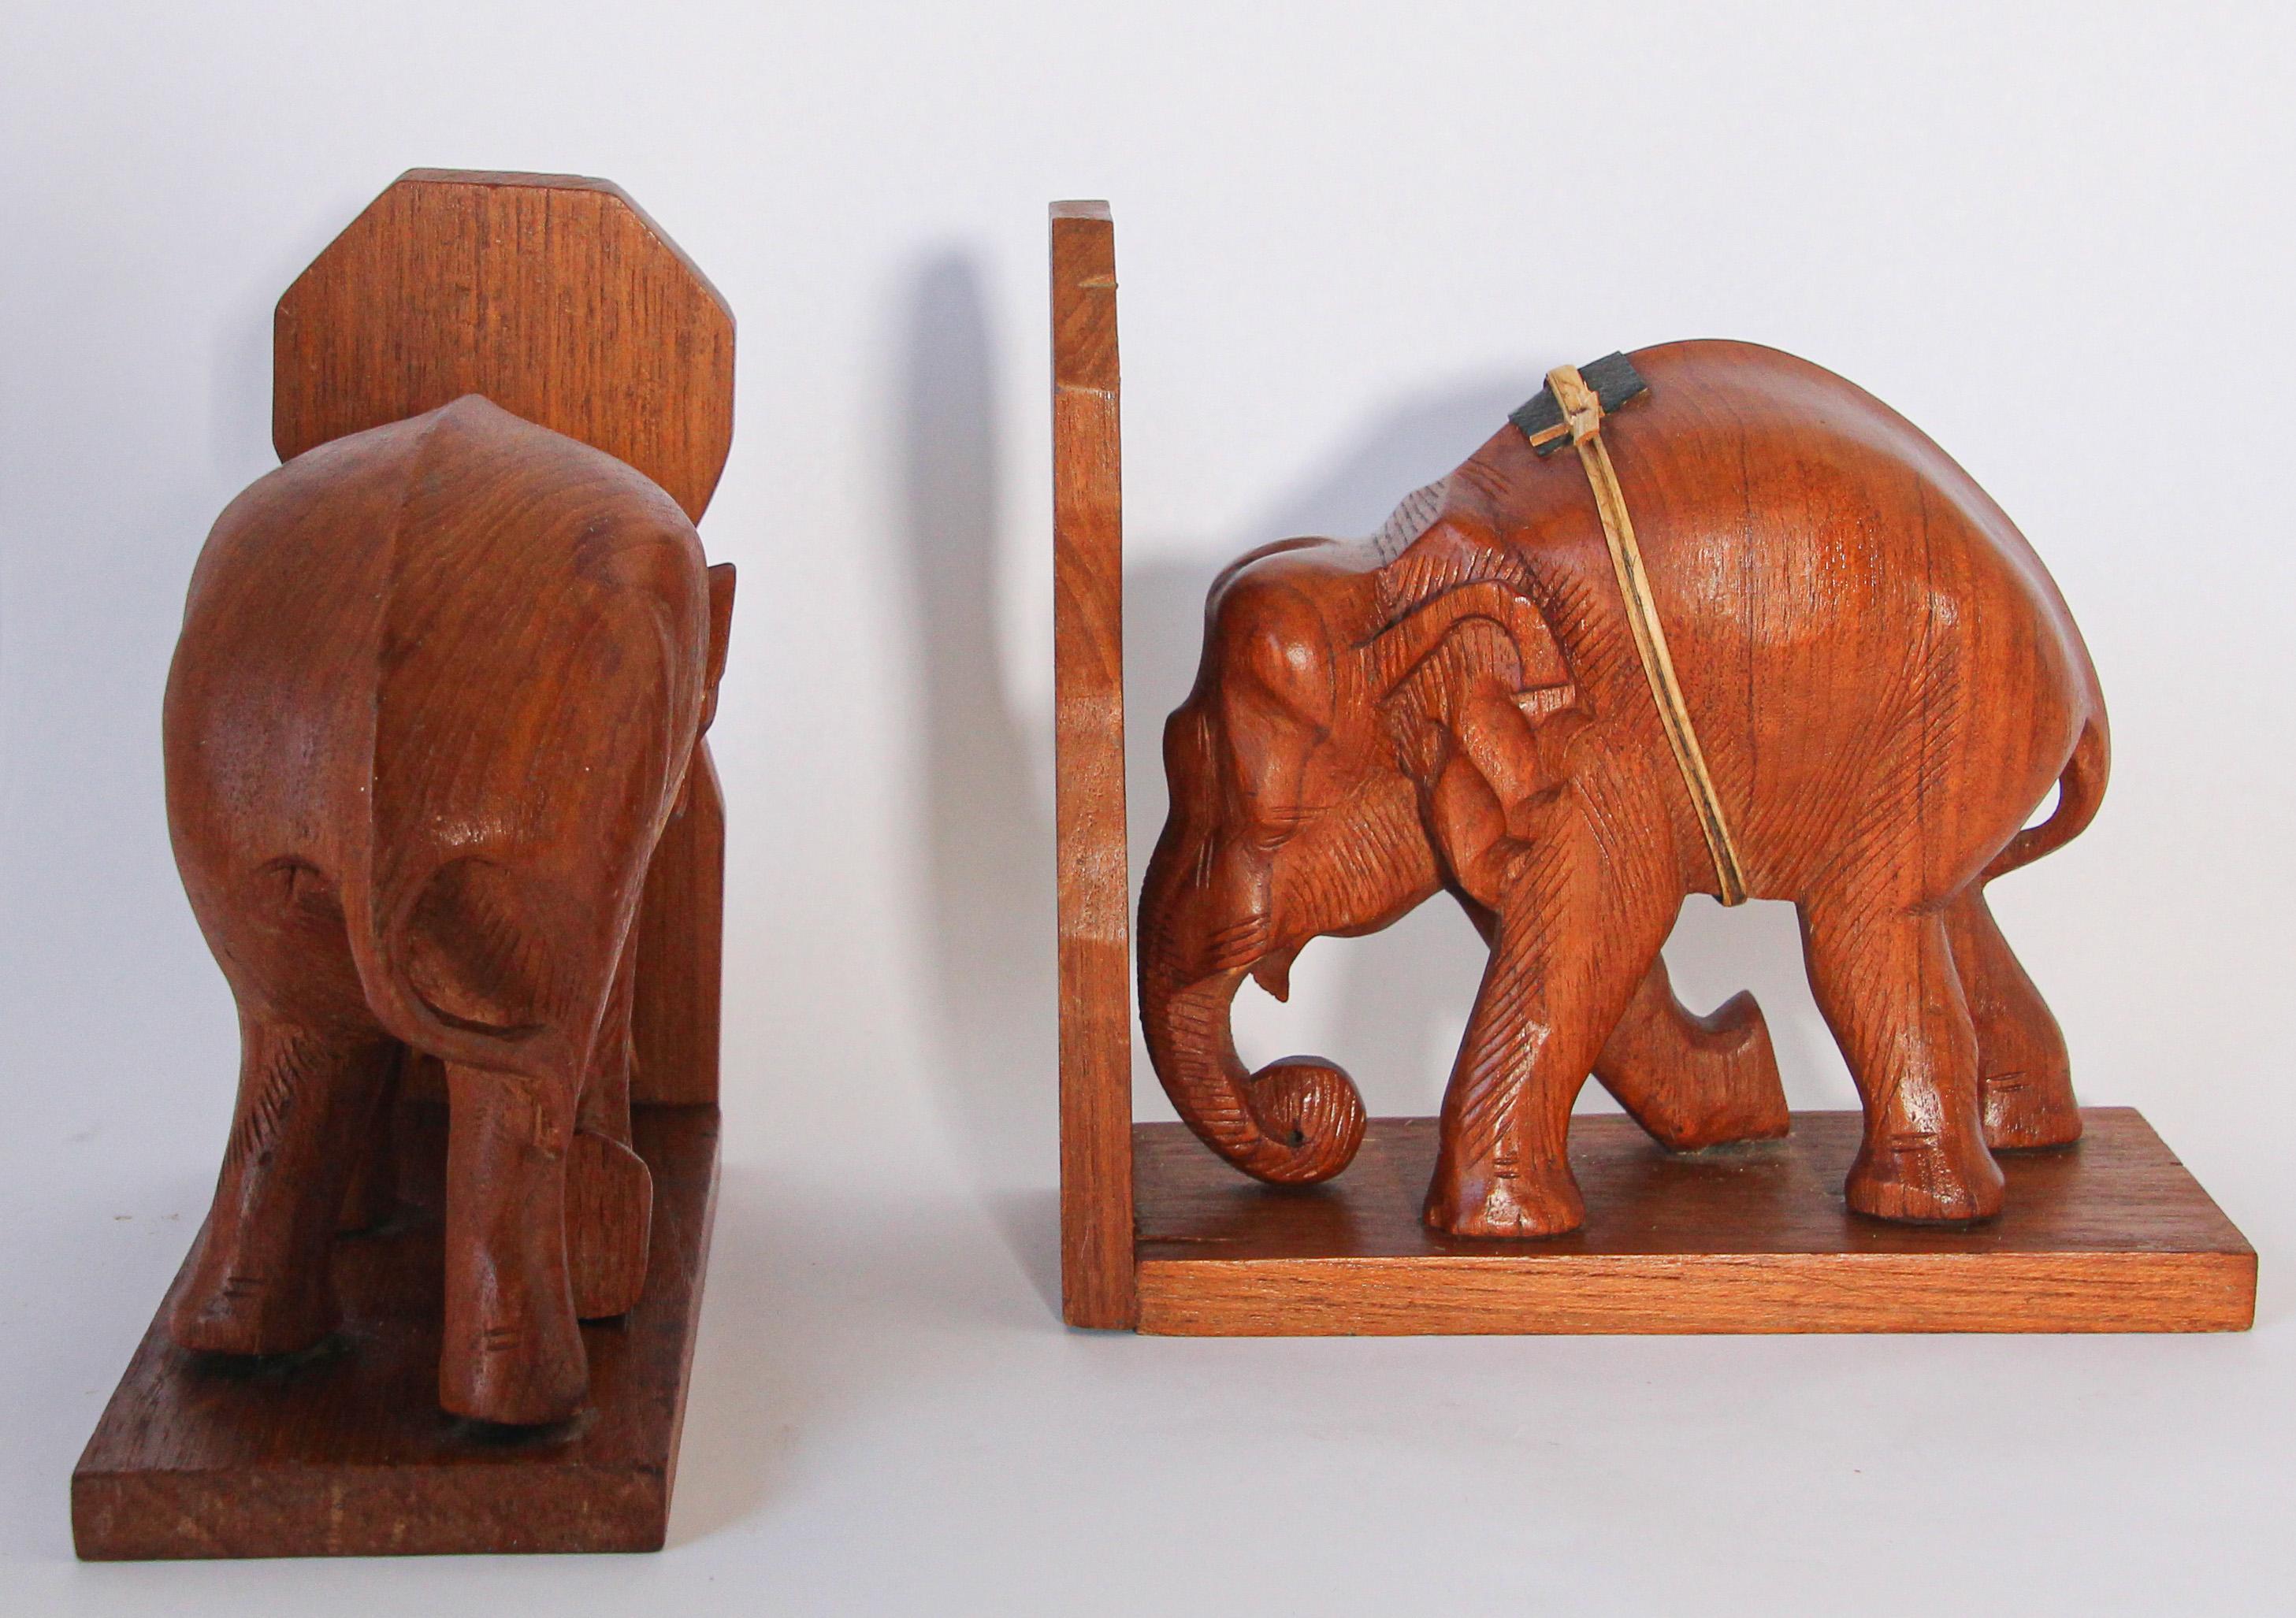 Indian Hand Carved Wooden Elephant Bookends, circa 1950